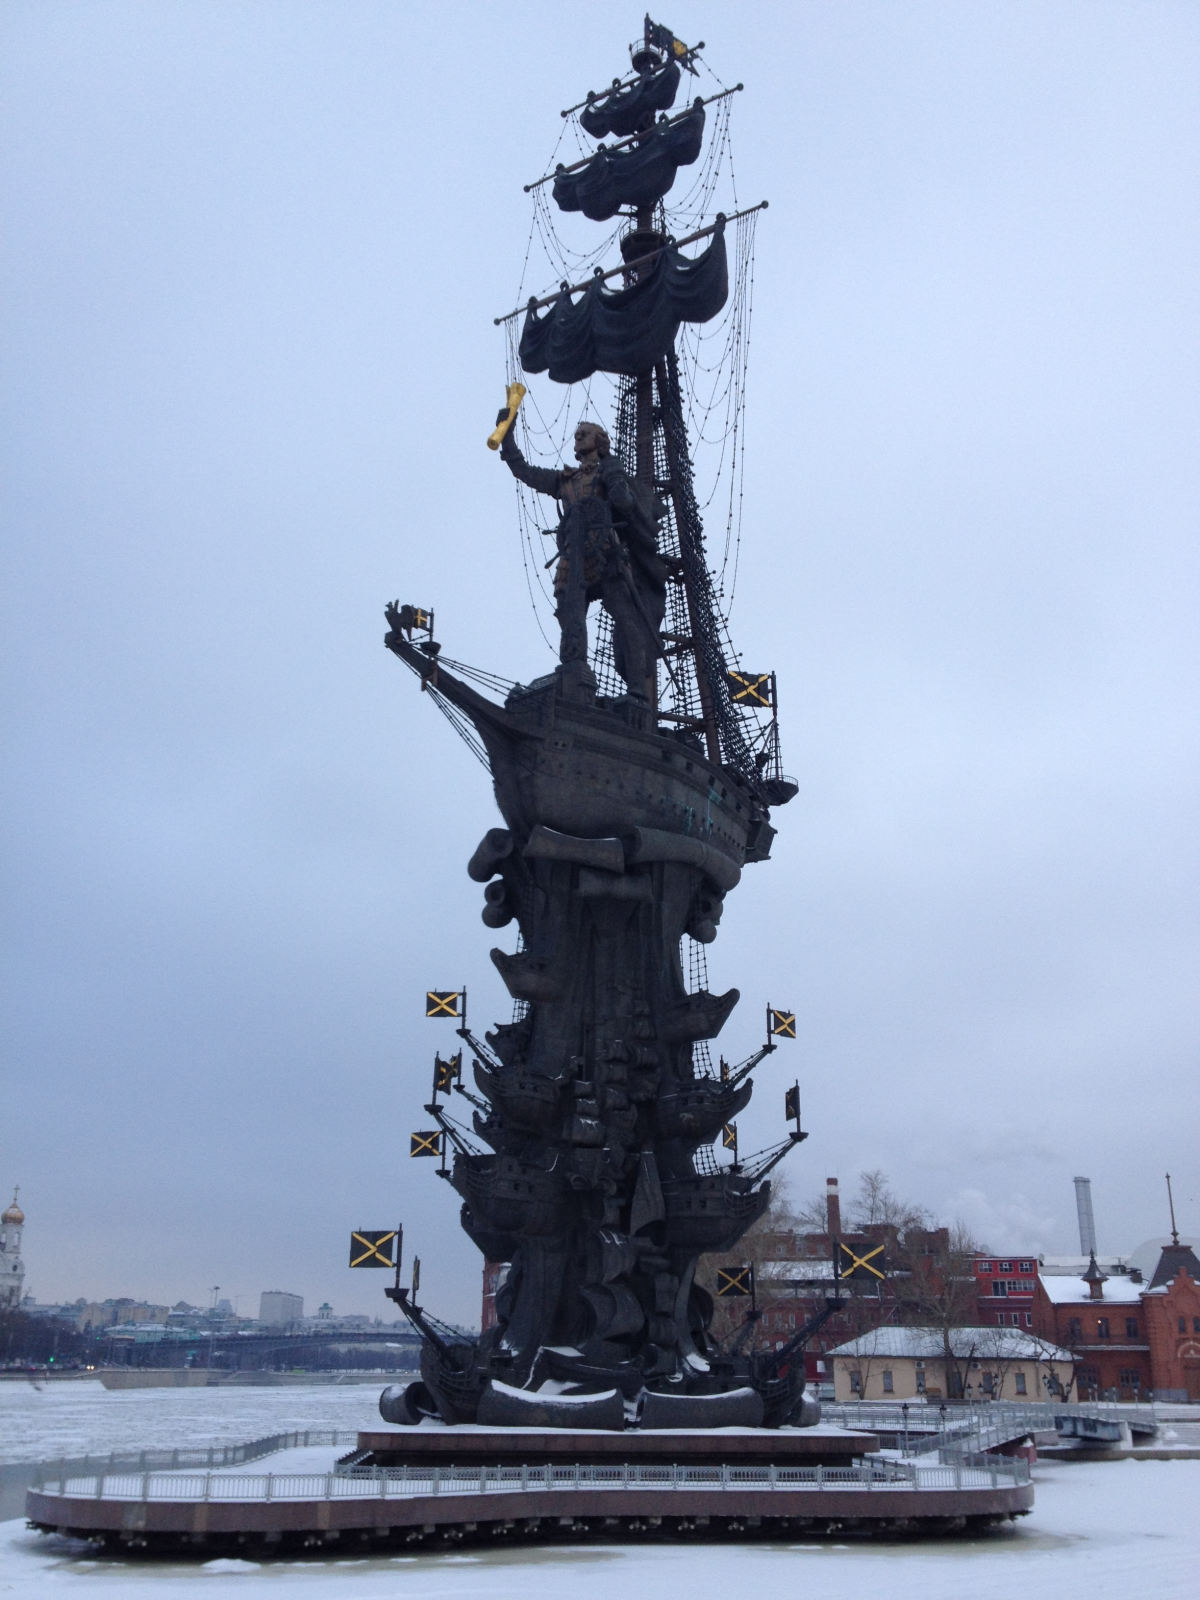 Peter the Great, not Christopher Columbus